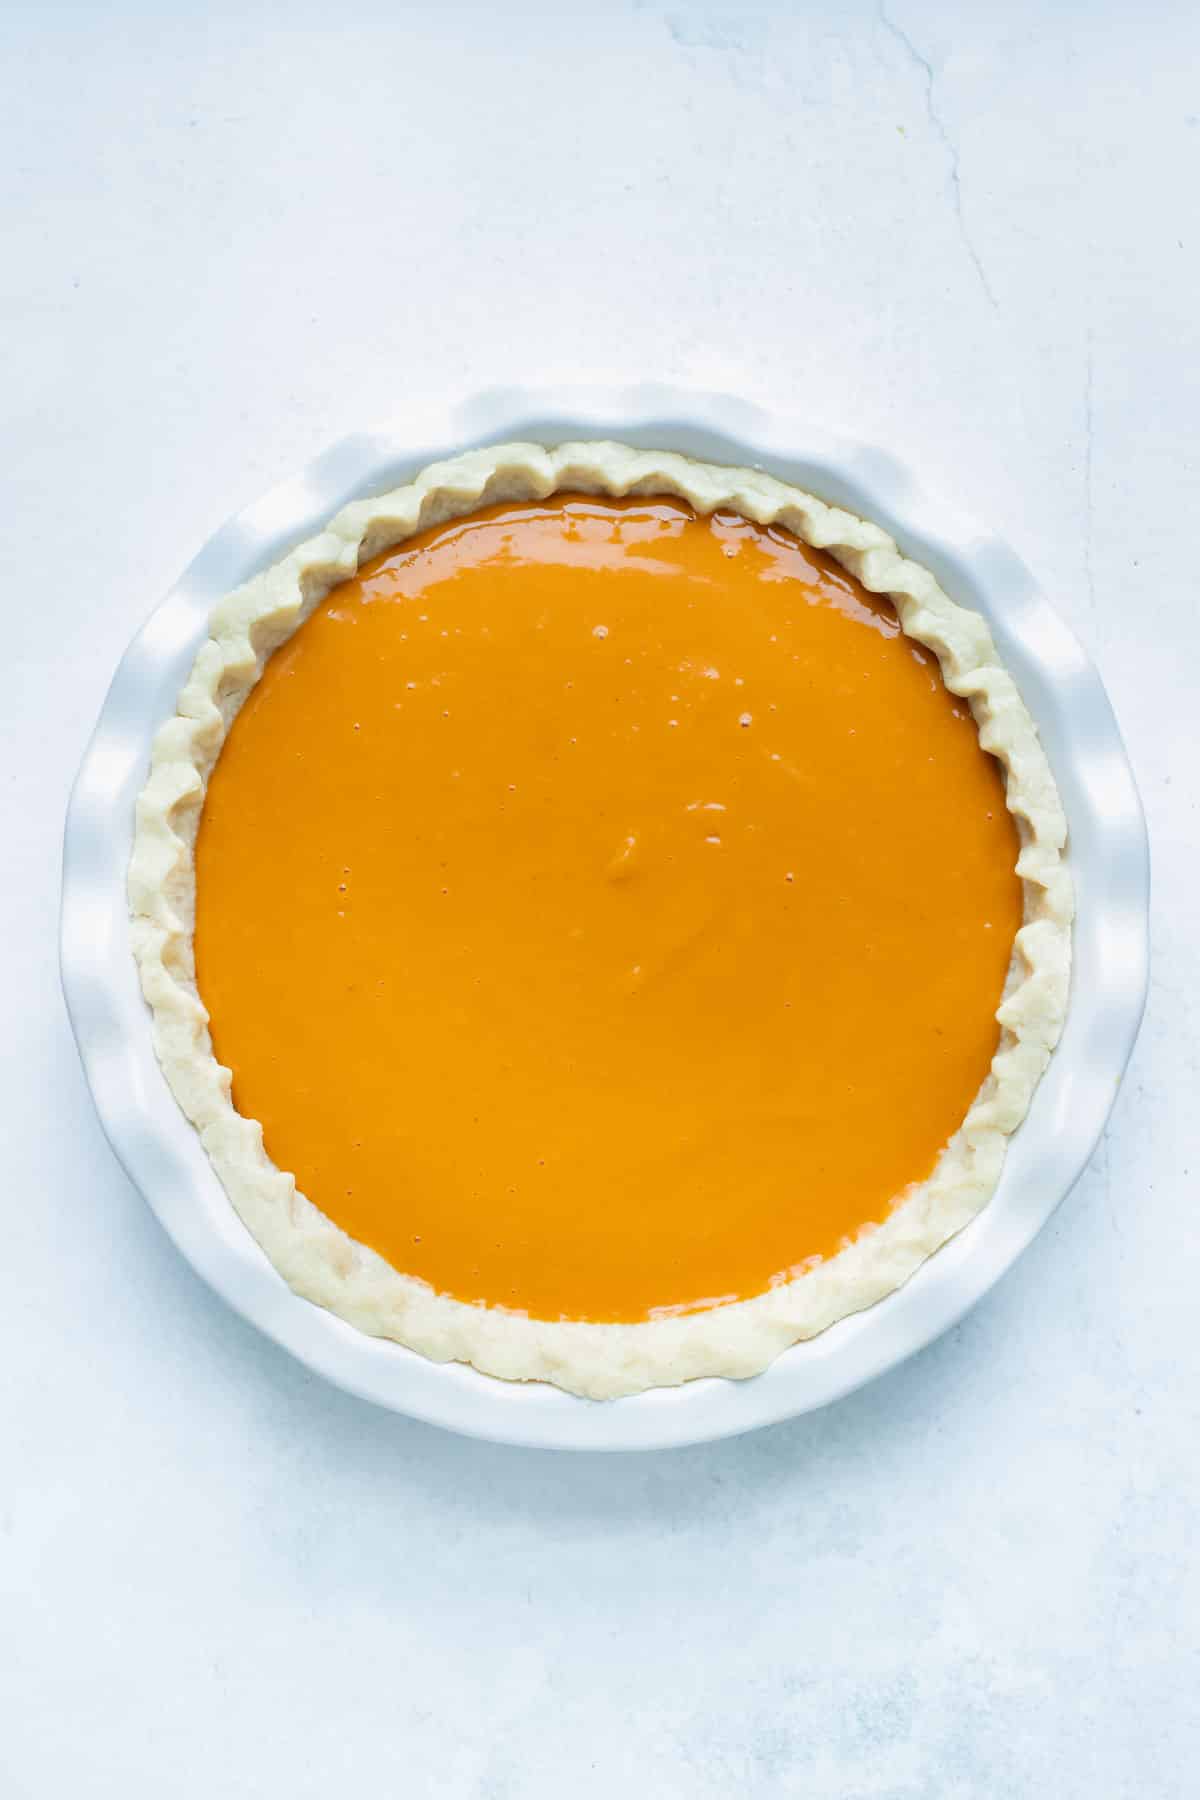 Southern sweet potato pie is filled and put in the oven.